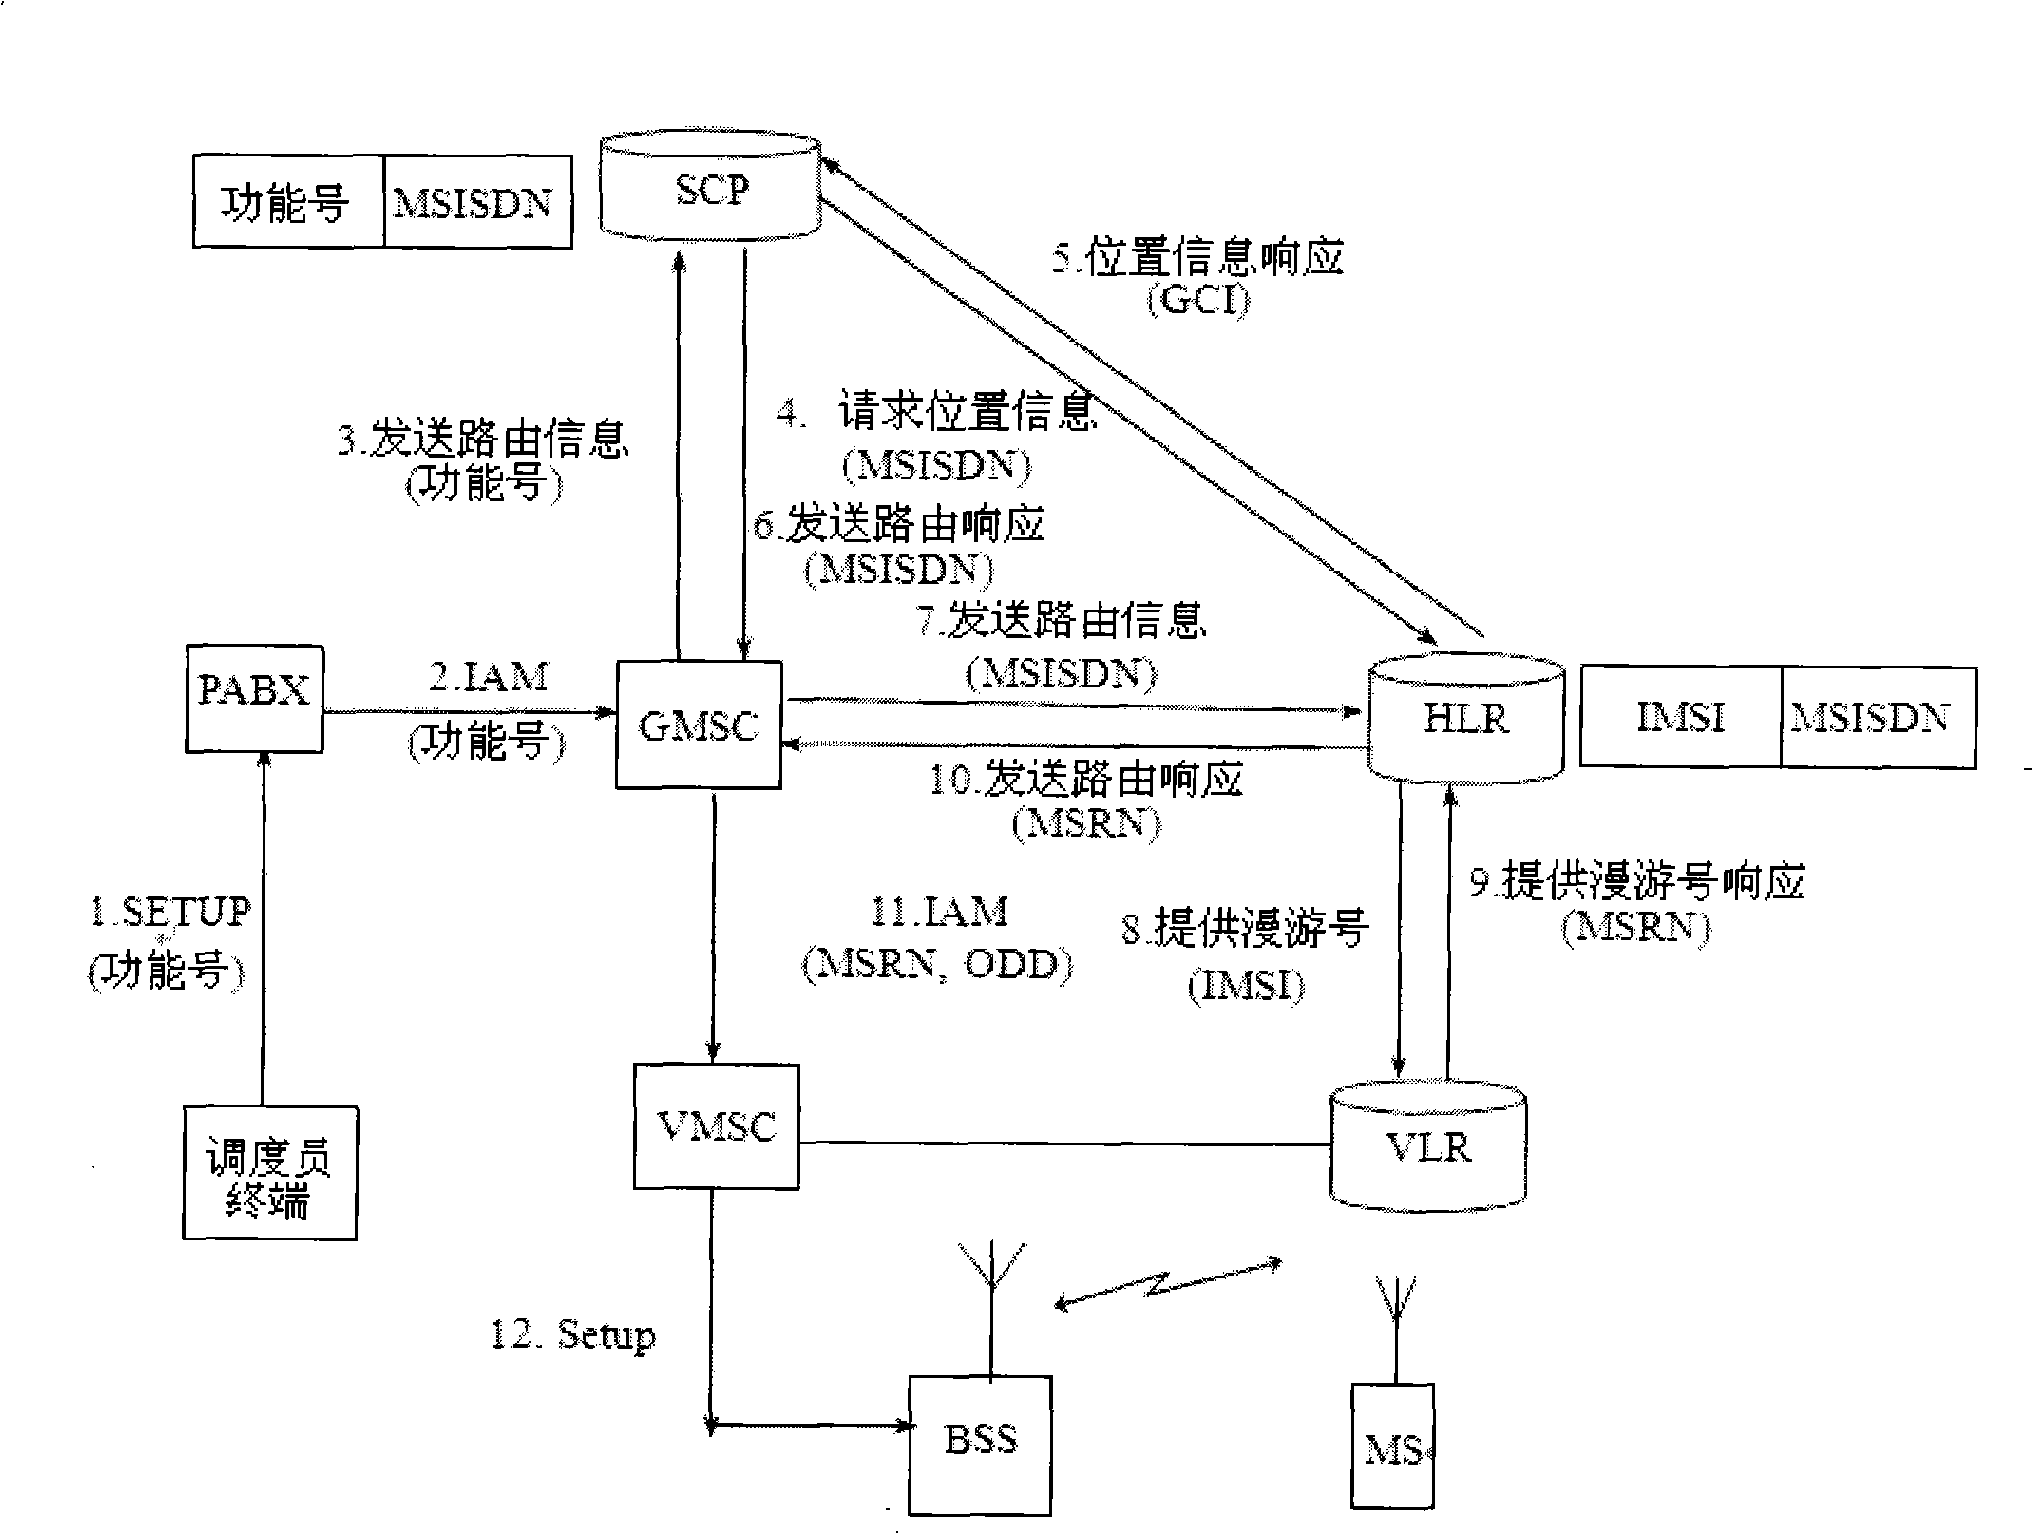 Method for resolving non uniqueness train number based on intelligent network position address